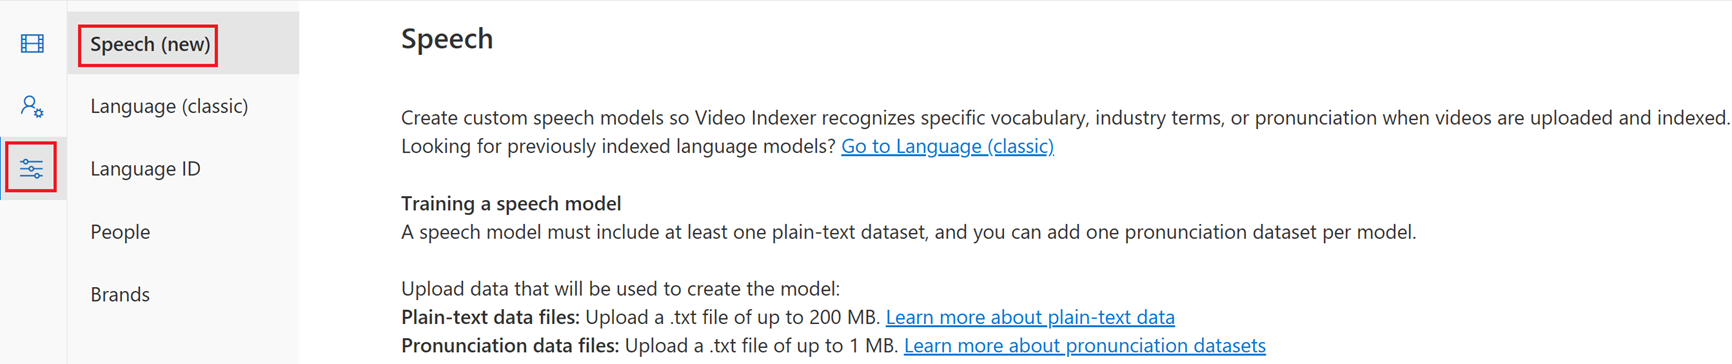 Screenshot of uploading datasets which are used to train the speech models.